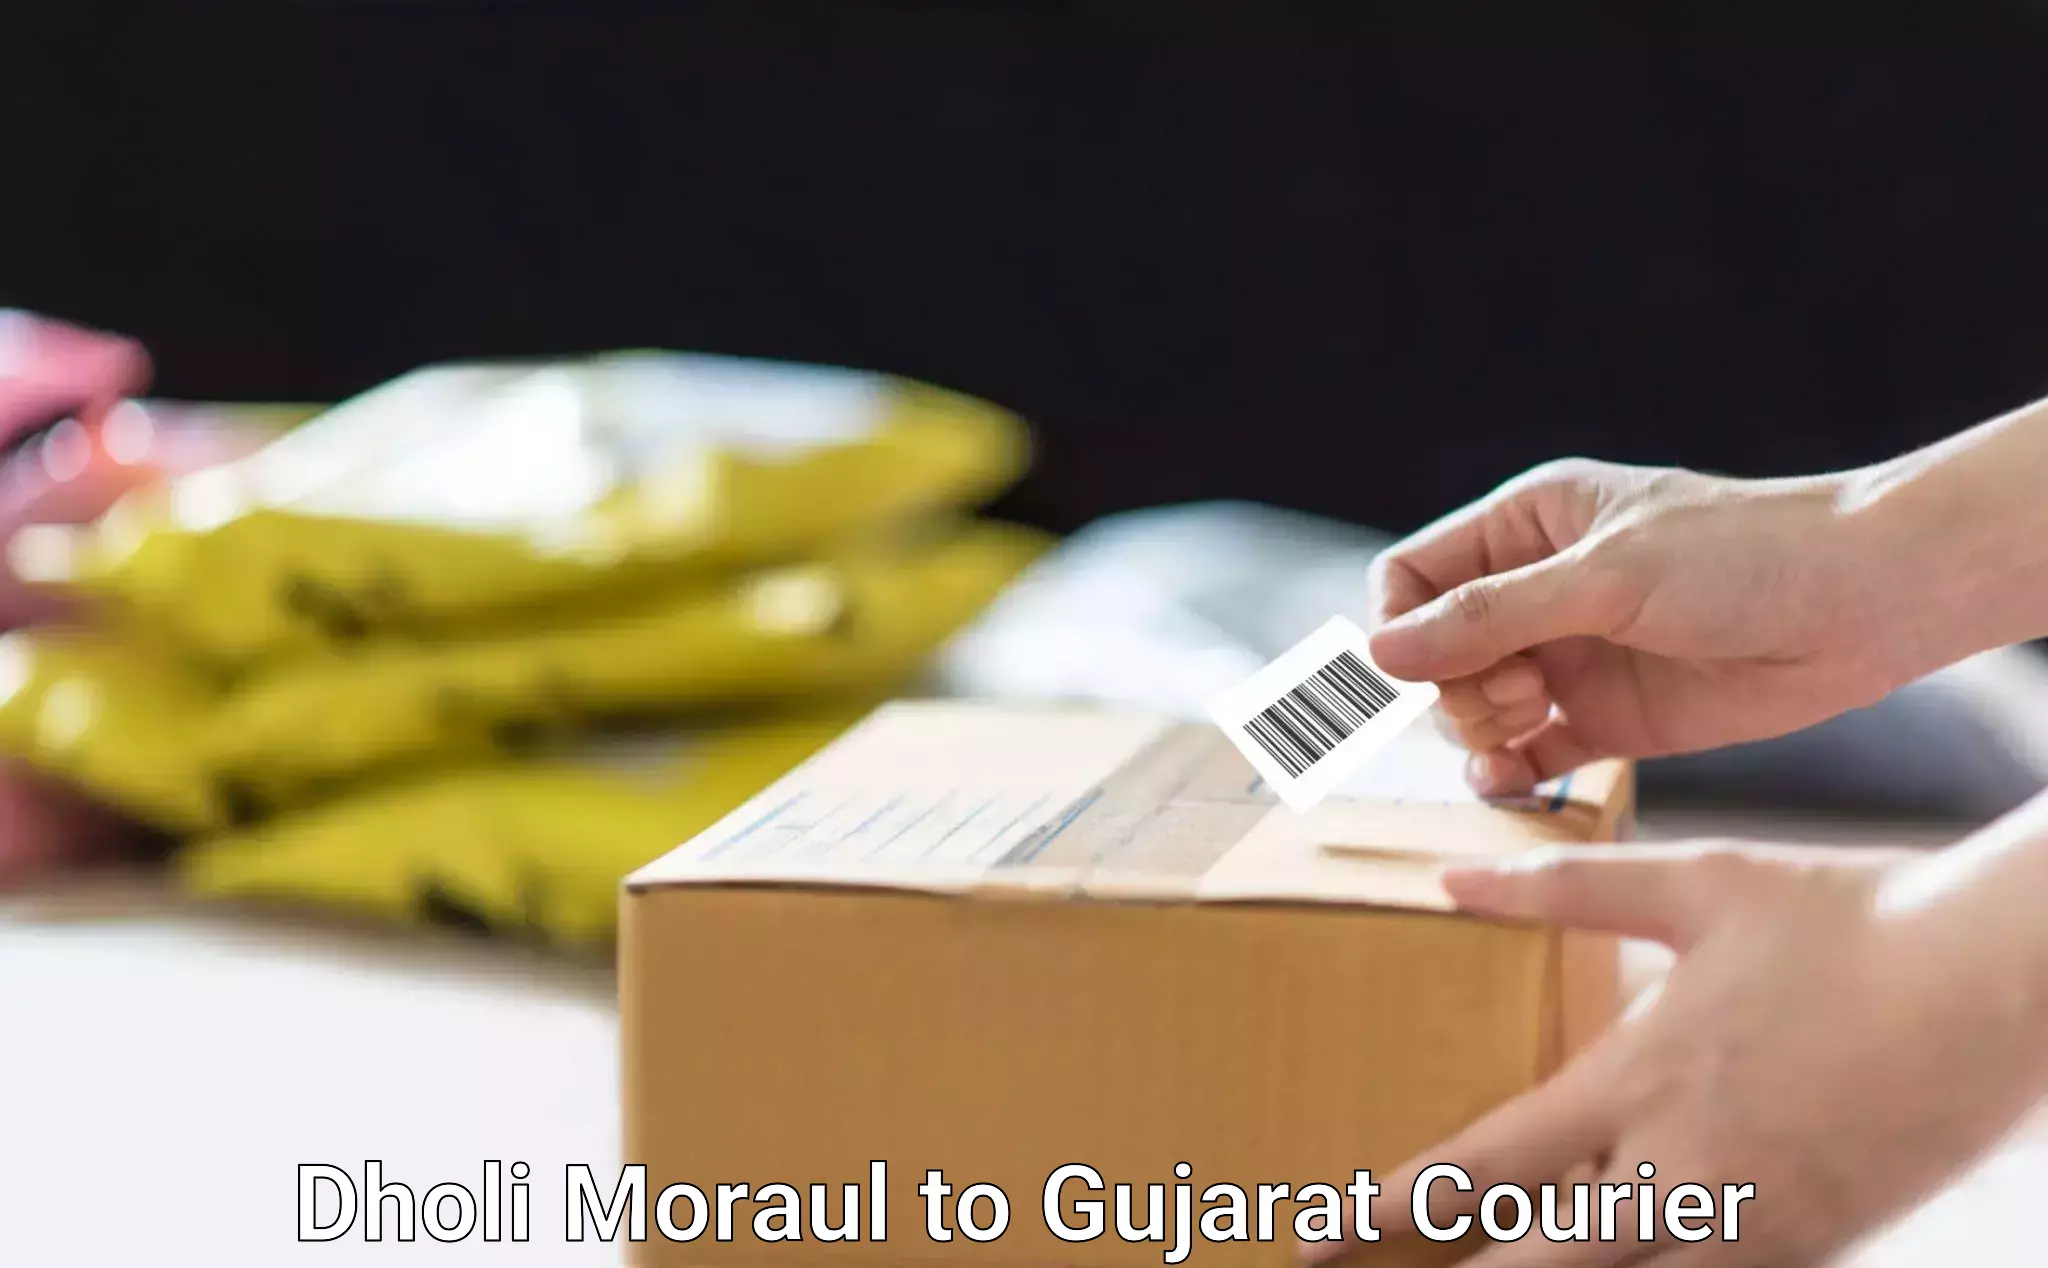 Professional movers and packers Dholi Moraul to Anand